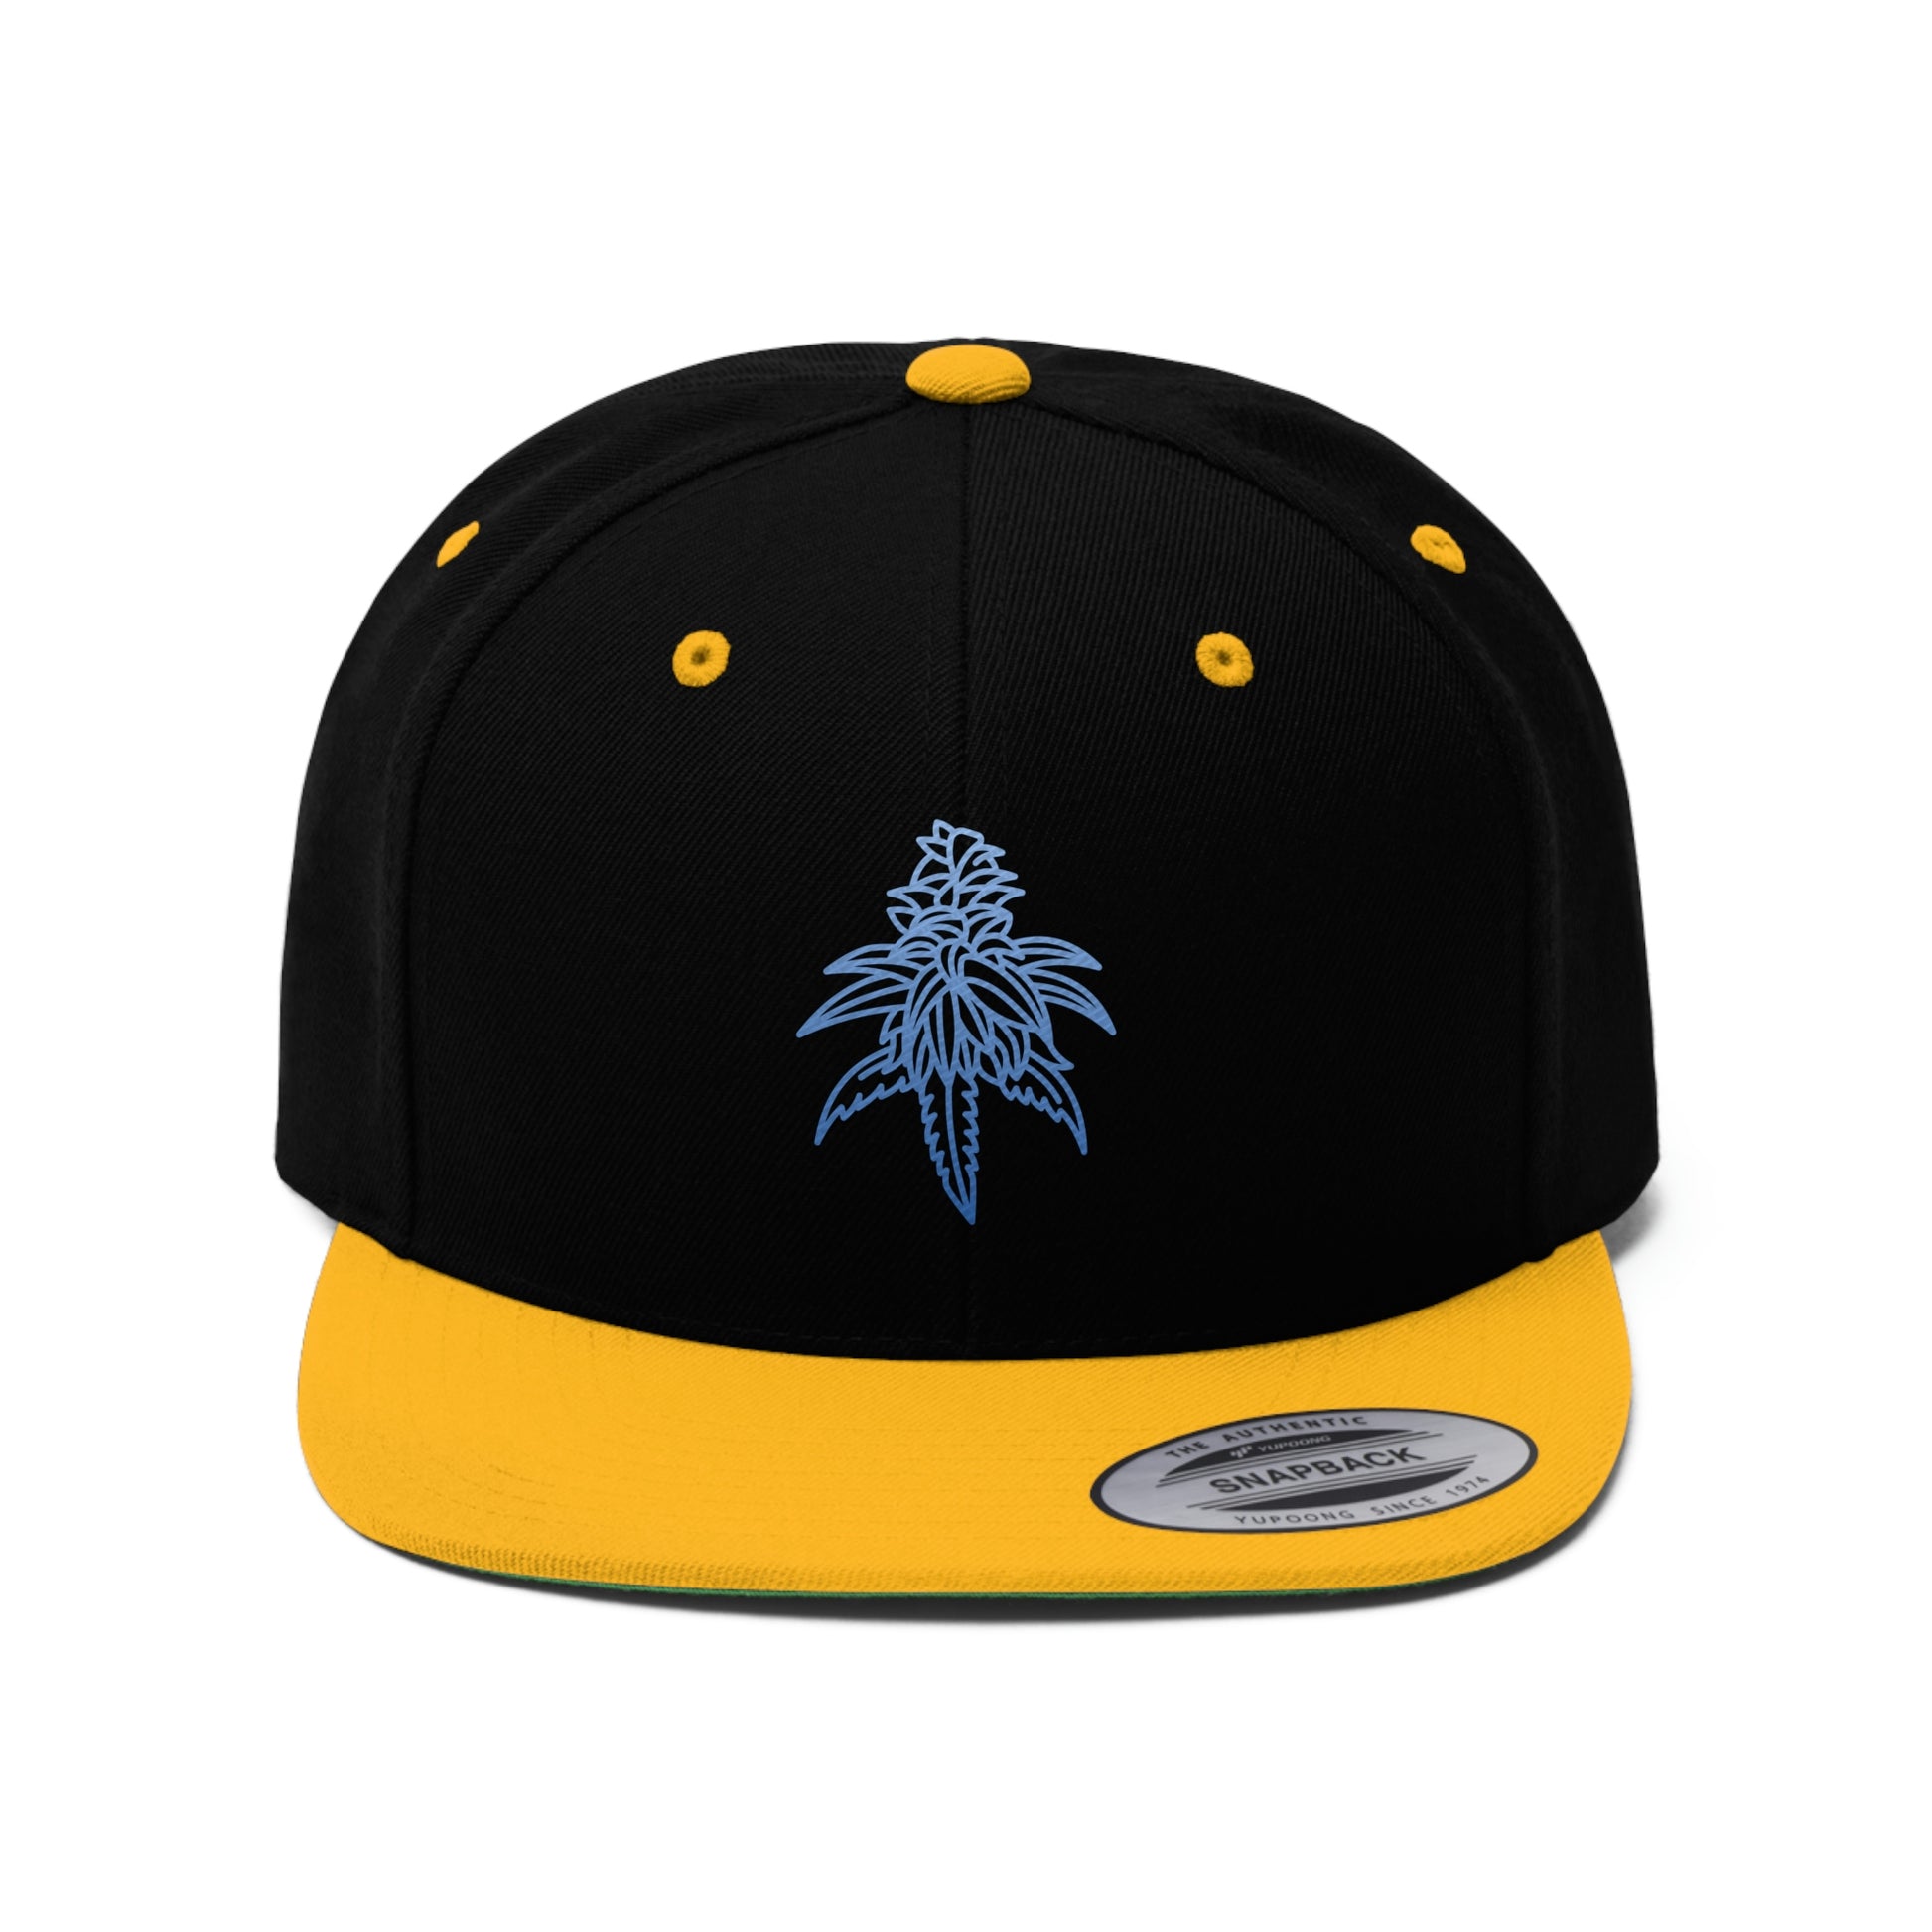 Blue Dream Snapback Hat in the yellow and black color scheme with the picture of blue dream on the front center in blue